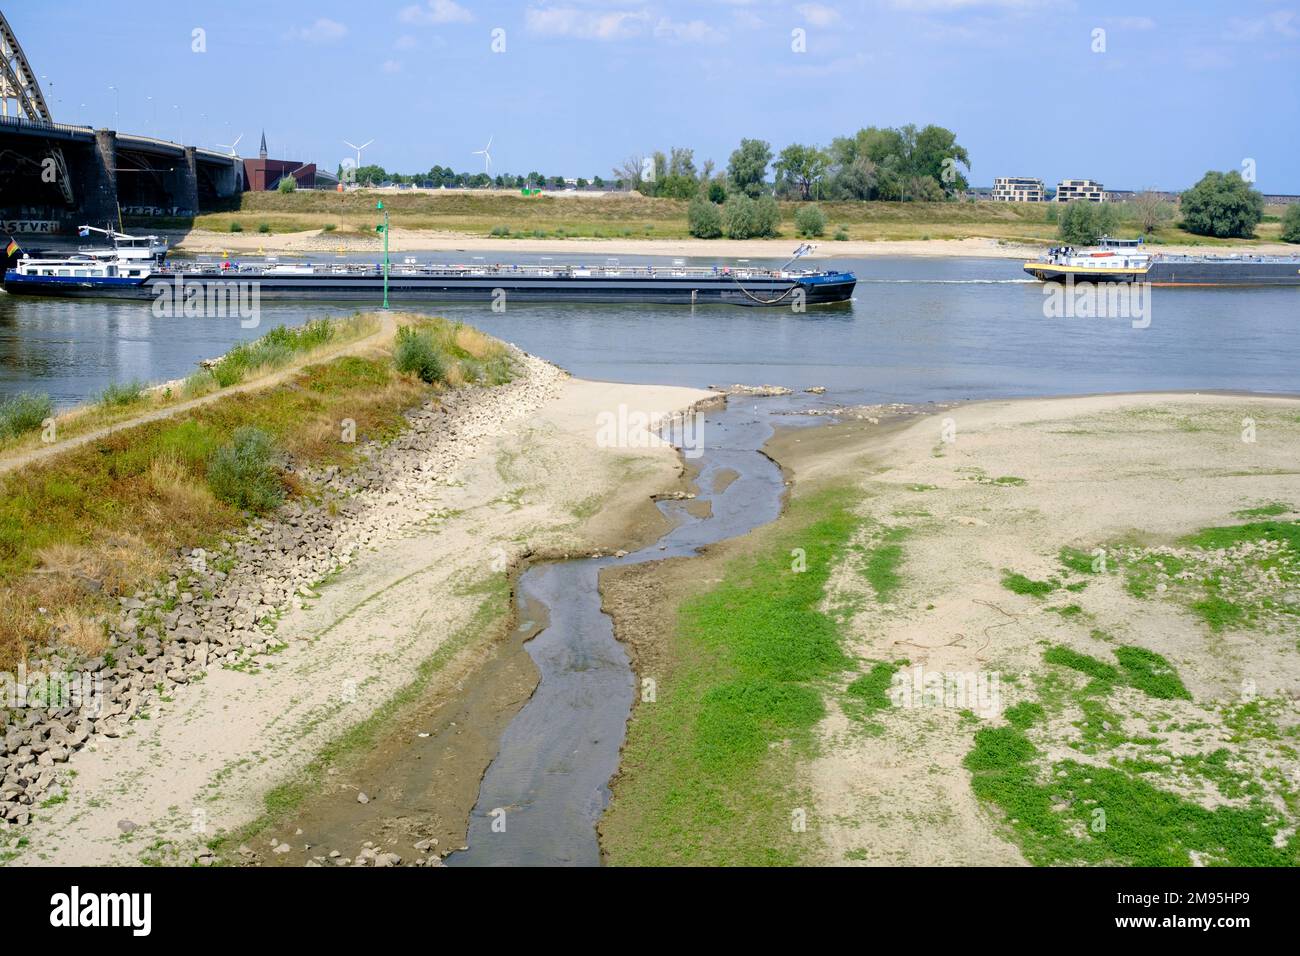 Netherlands, Ooyse Schependom, August 23, 2022: river transport on the River Waal, Rhine delta, during the drought of summer 2022. Chemical tanker. Th Stock Photo